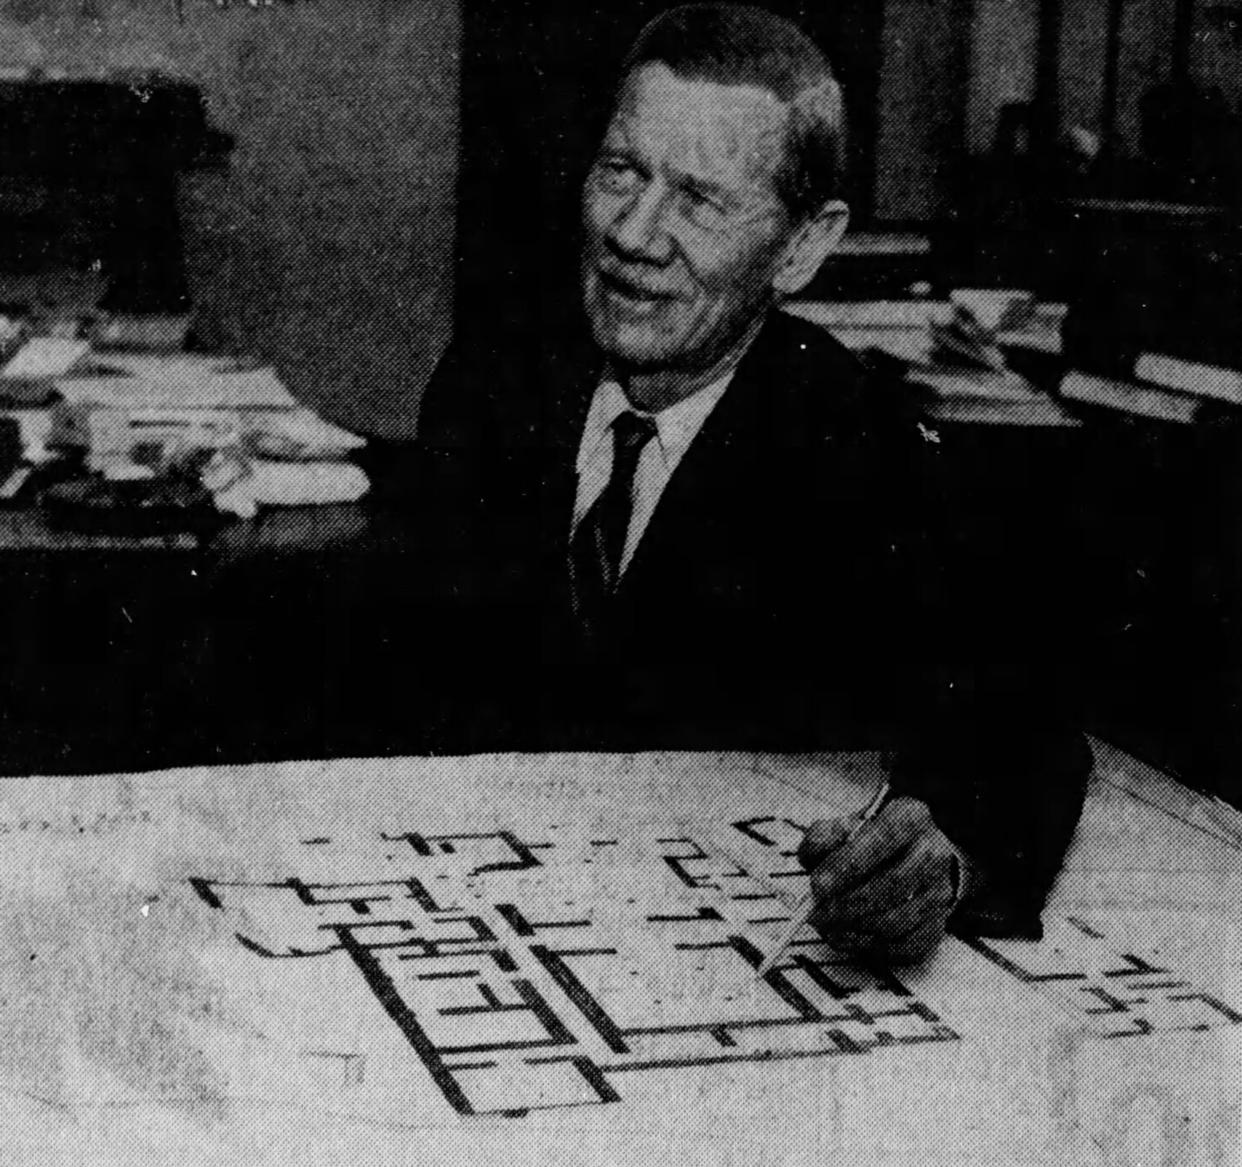 University of Cincinnati archaeologist Carl W. Blegen, shown with the plan of King Nestor’s palace in a 1956 photo, gained fame for helping excavate the ancient city of Troy in 1932.